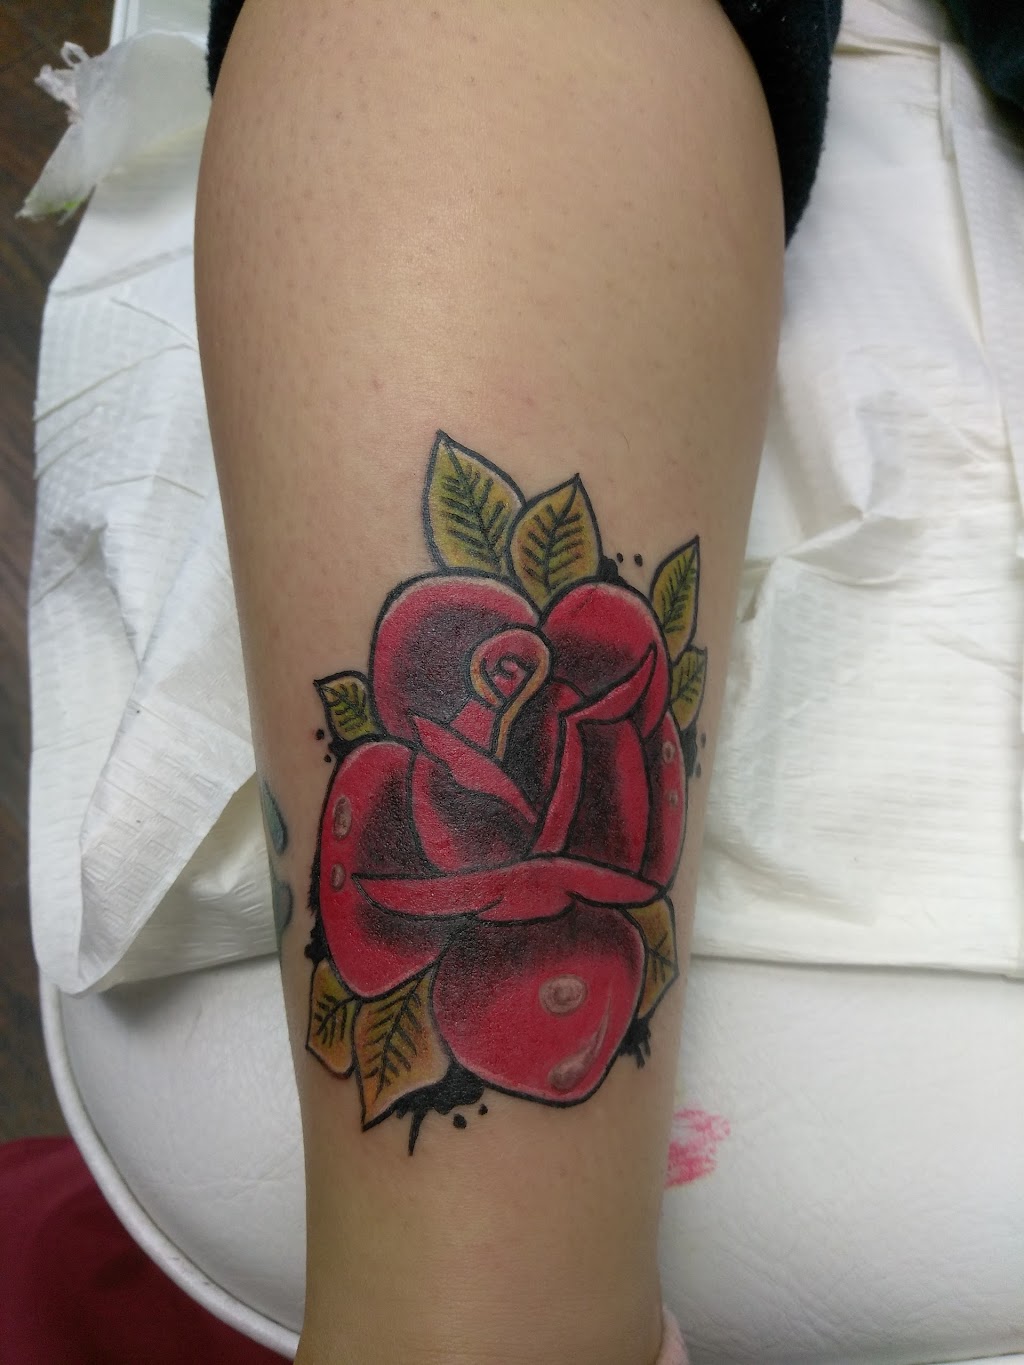 Evermore ink | 5 William Ave, East Islip, NY 11730 | Phone: (631) 835-3782